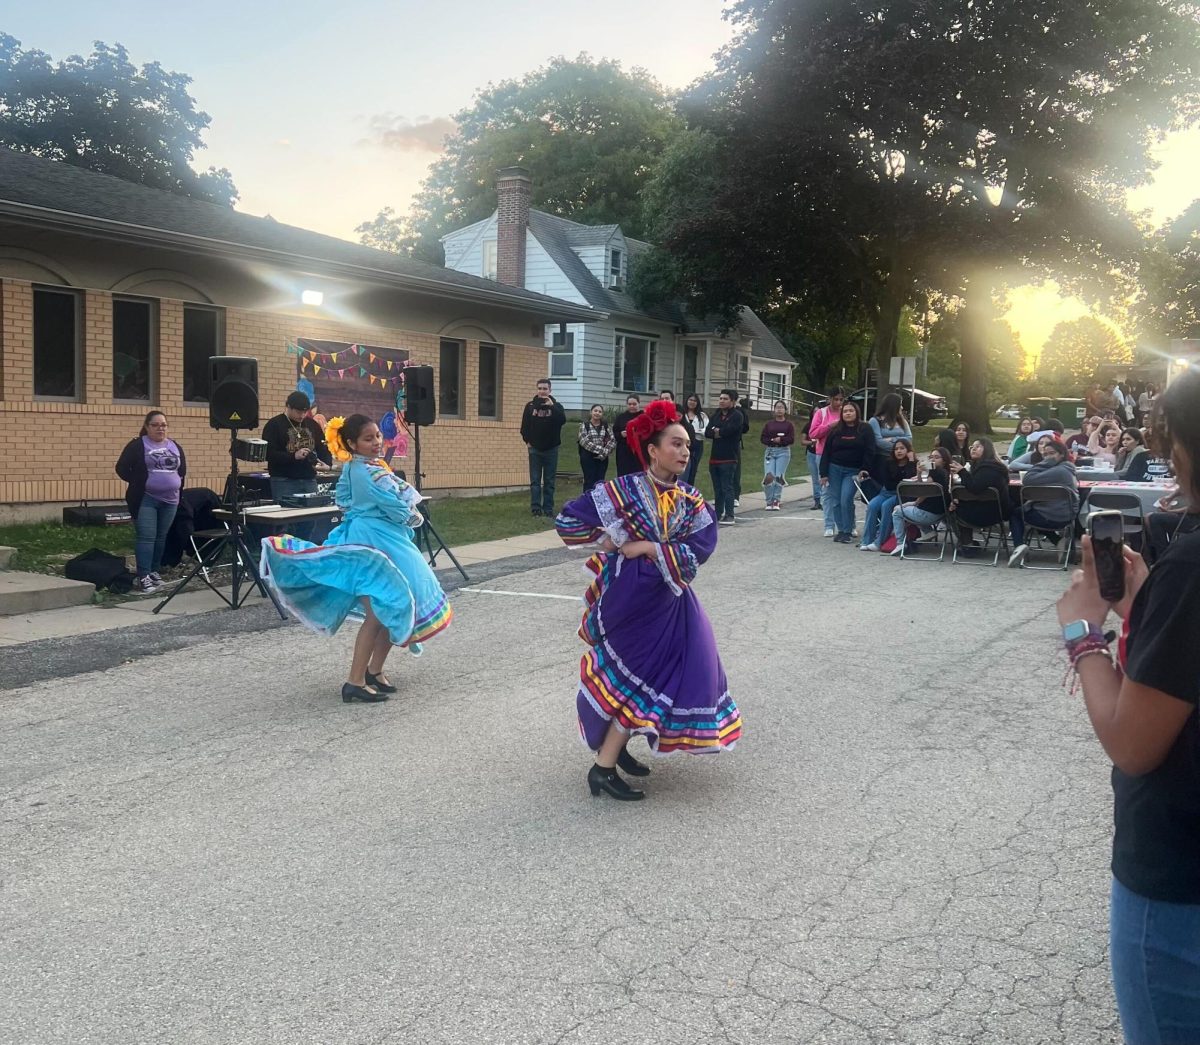 Folkl%C3%B3rico+dancers+perform+for+a+crowd+Wednesday+at+the+Latino+Resource+Center+at+El+Grito.+El+Grito+is+celebrated+on+the+eve+of+Mexican+Independence+Day%2C+but+was+celebrated+in+honor+of+all+Latino+heritage+at+the+event.+%28Kaitlyn+Lee-Gordon+%7C+Northern+Star%29